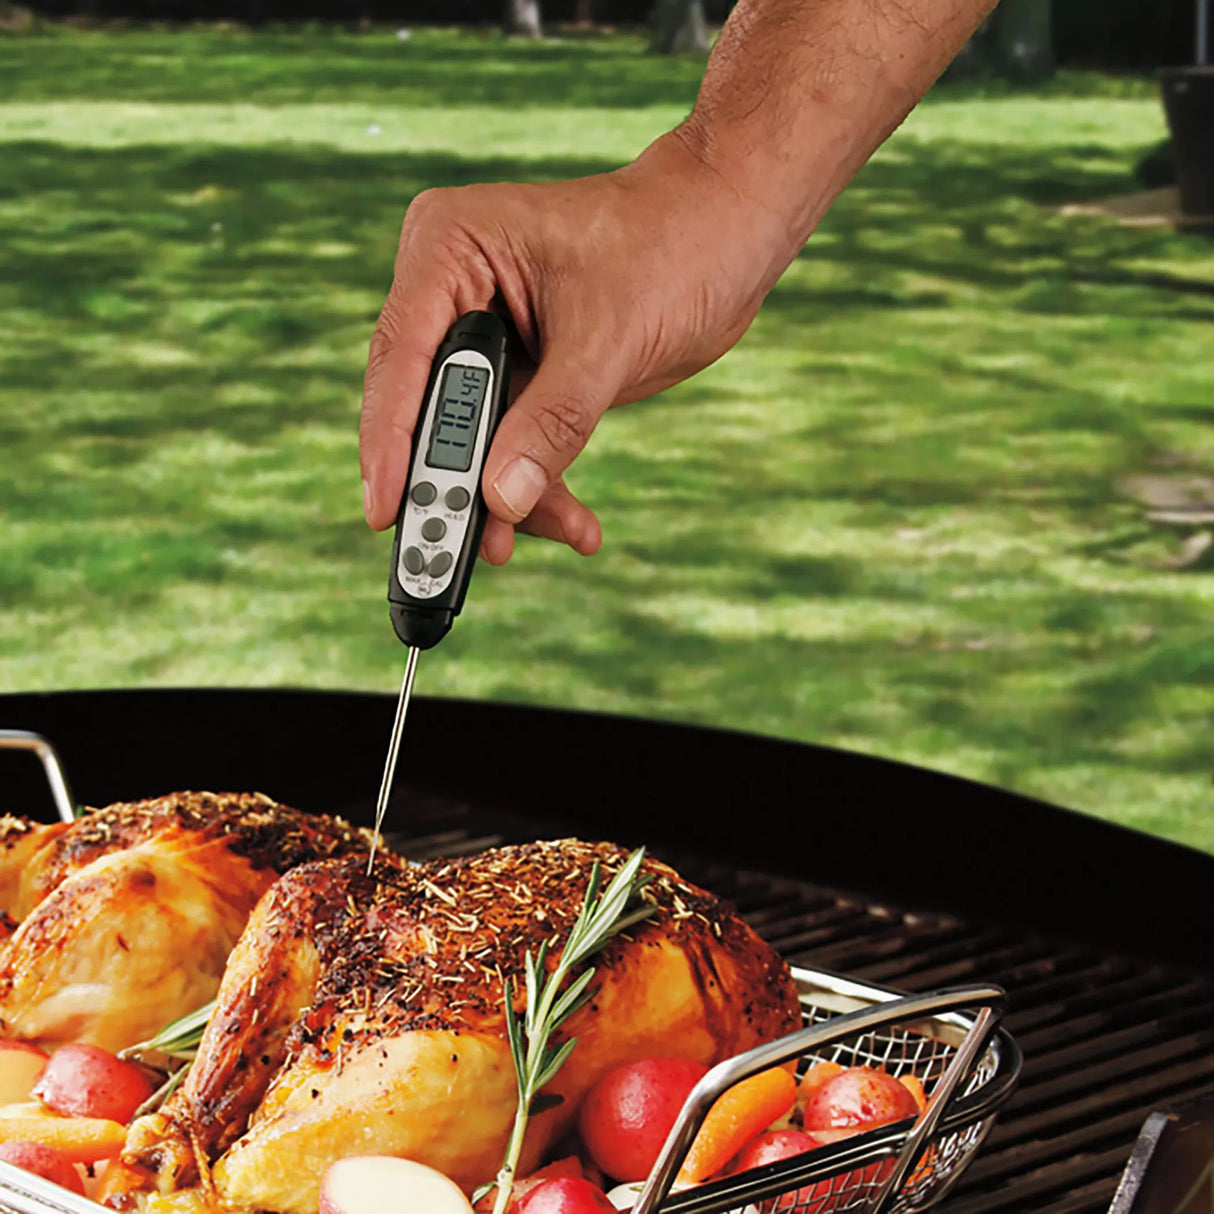 Best Priced BBQ Thermometers - Fast Despatch